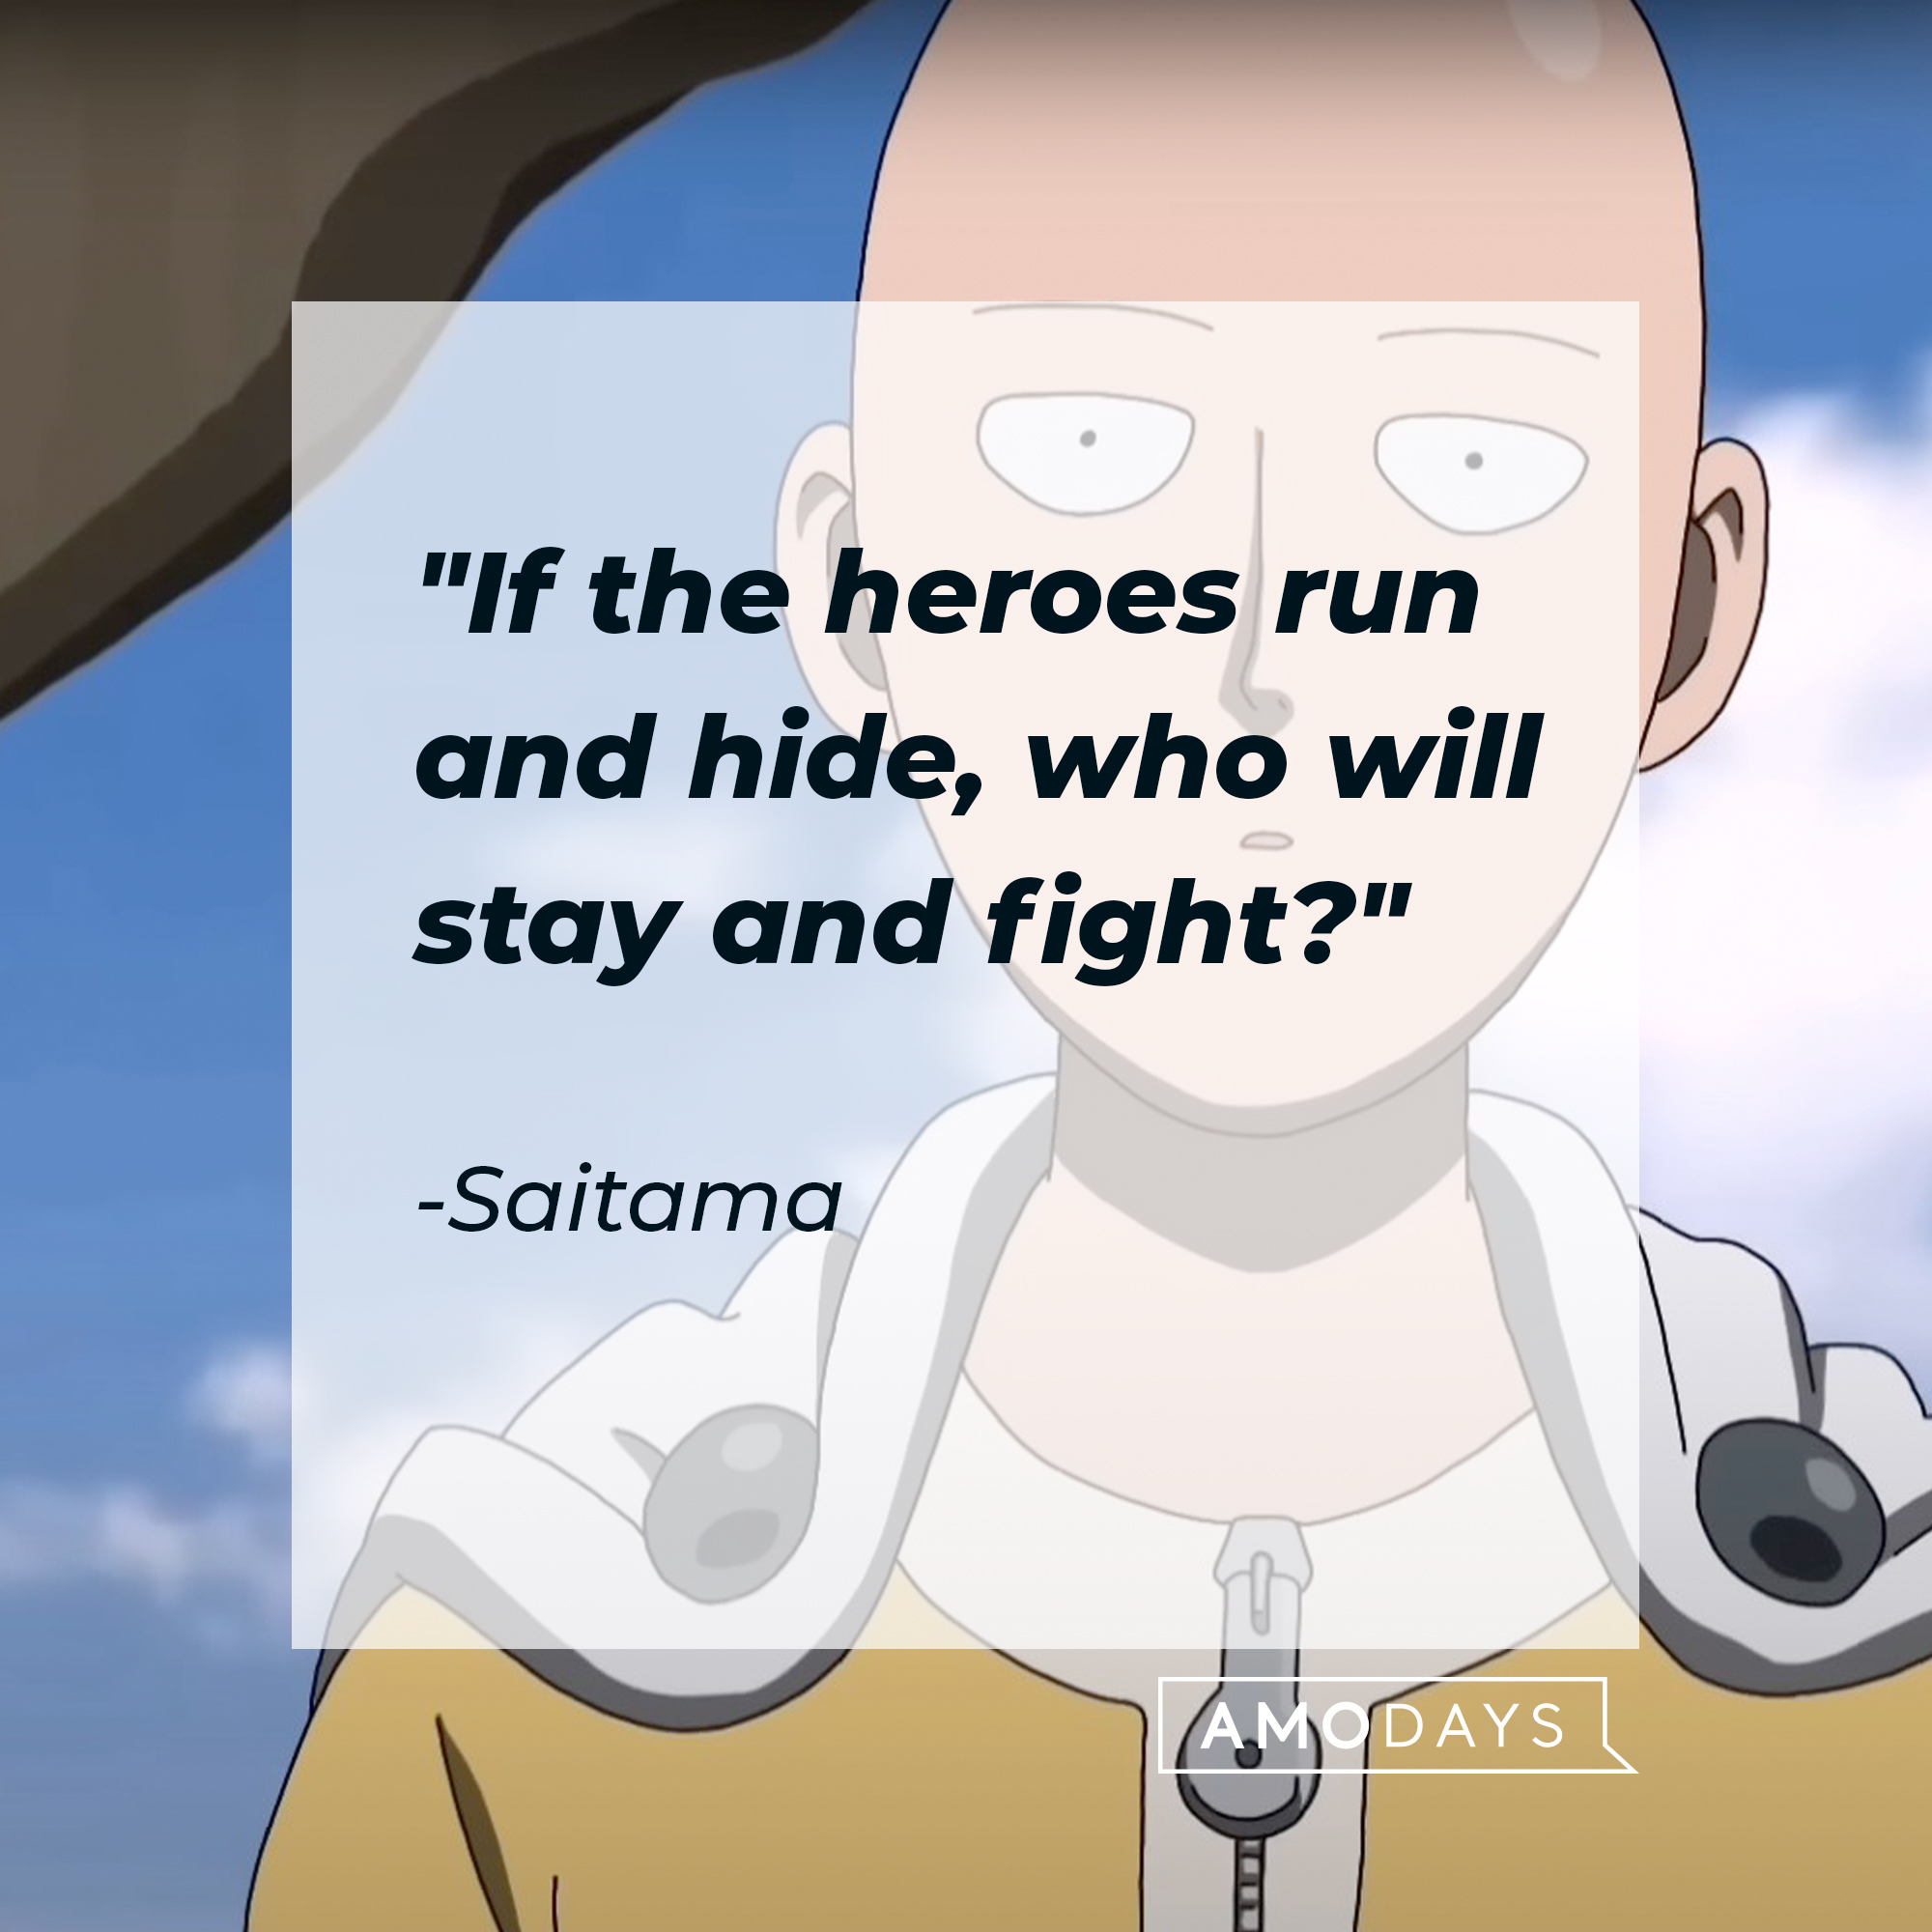 Saitama's quote: "If the heroes run and hide, who will stay and fight?" | Source: Facebook.com/OnePunchManMobileSEAEN